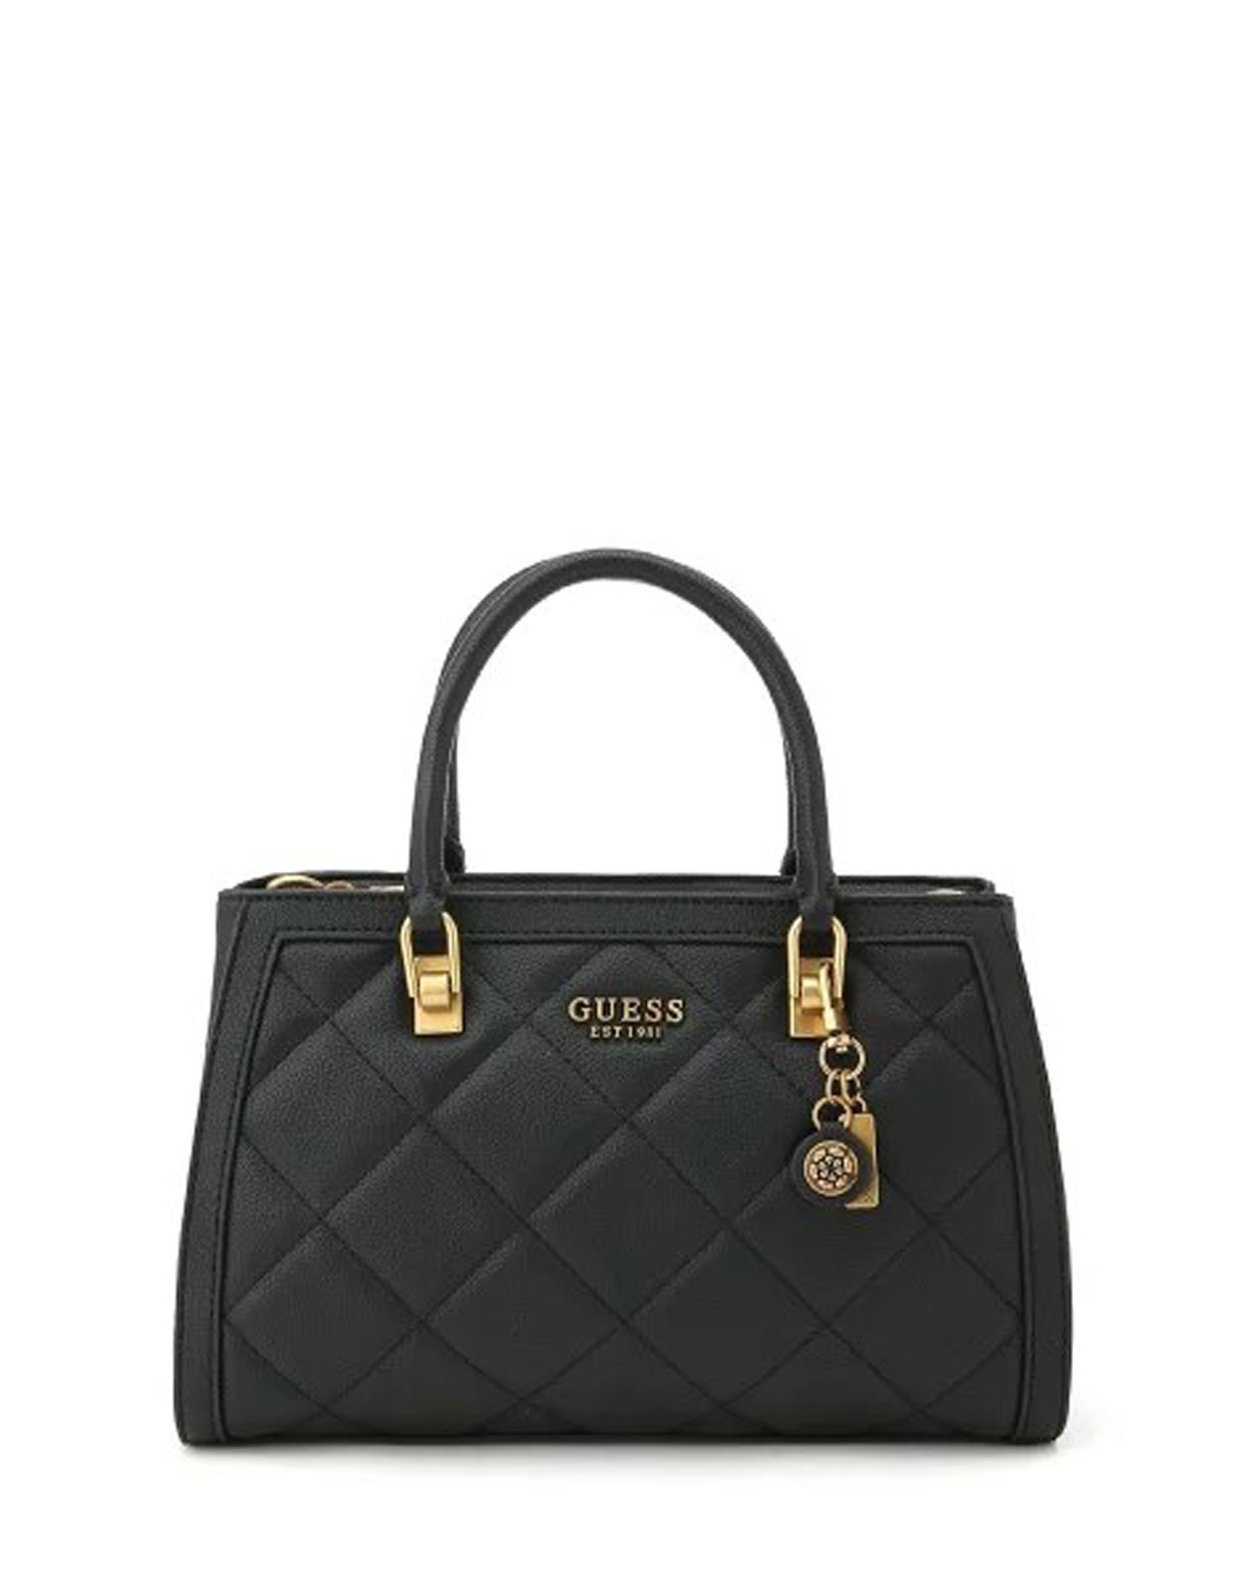 Guess Abey girlfriend satchel quilted bag black